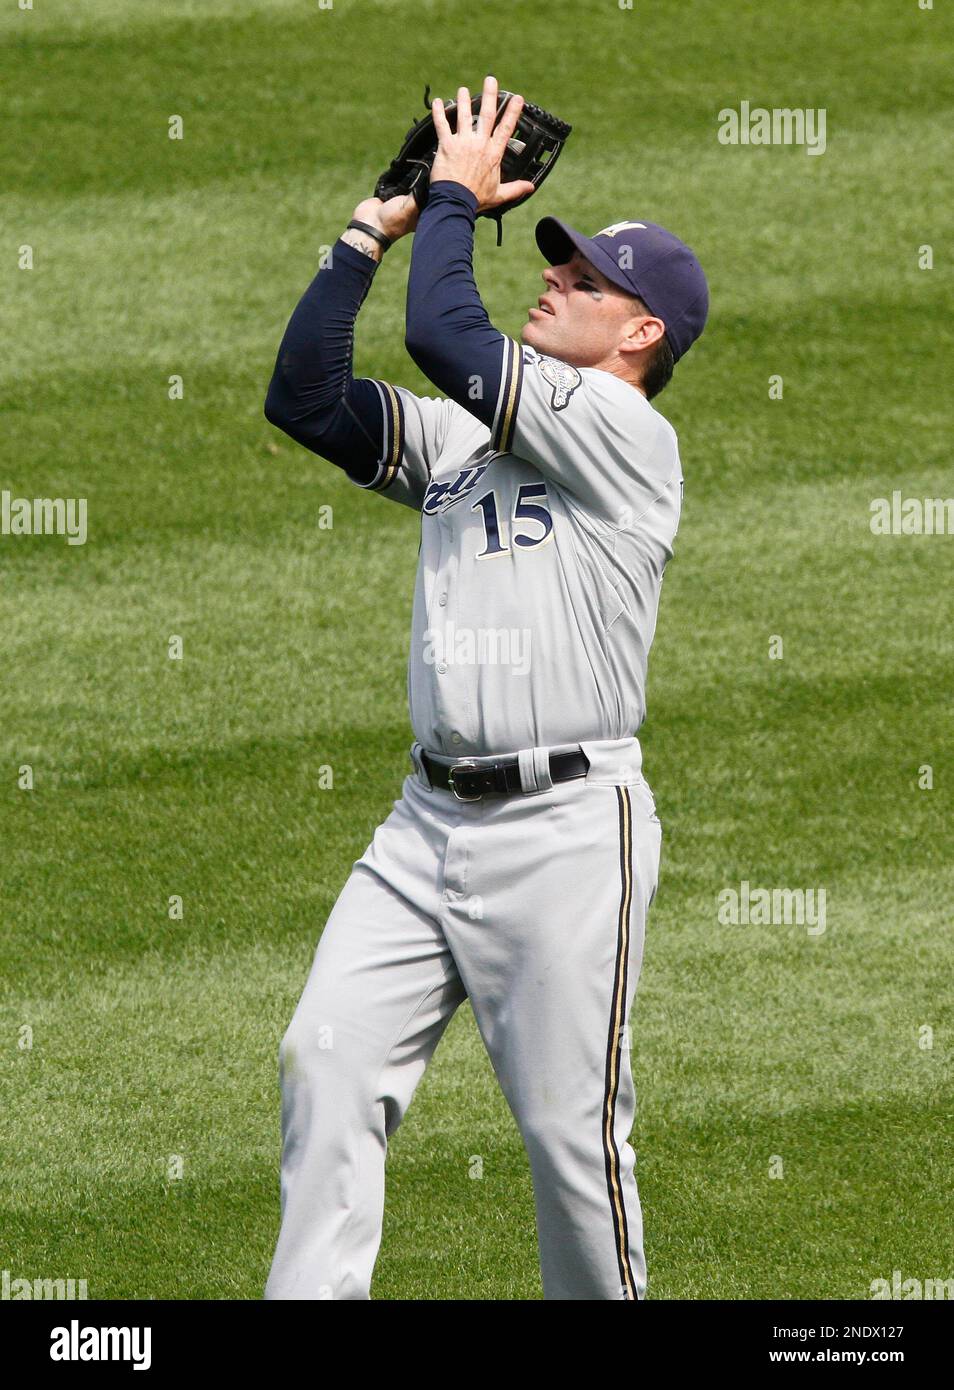 Milwaukee Brewers right fielder Jim Edmonds (15) rounds the bases after  hitting a homerun during the 7th inning of the game between the Milwaukee  Brewers and Washington Nationals at Miller Park in